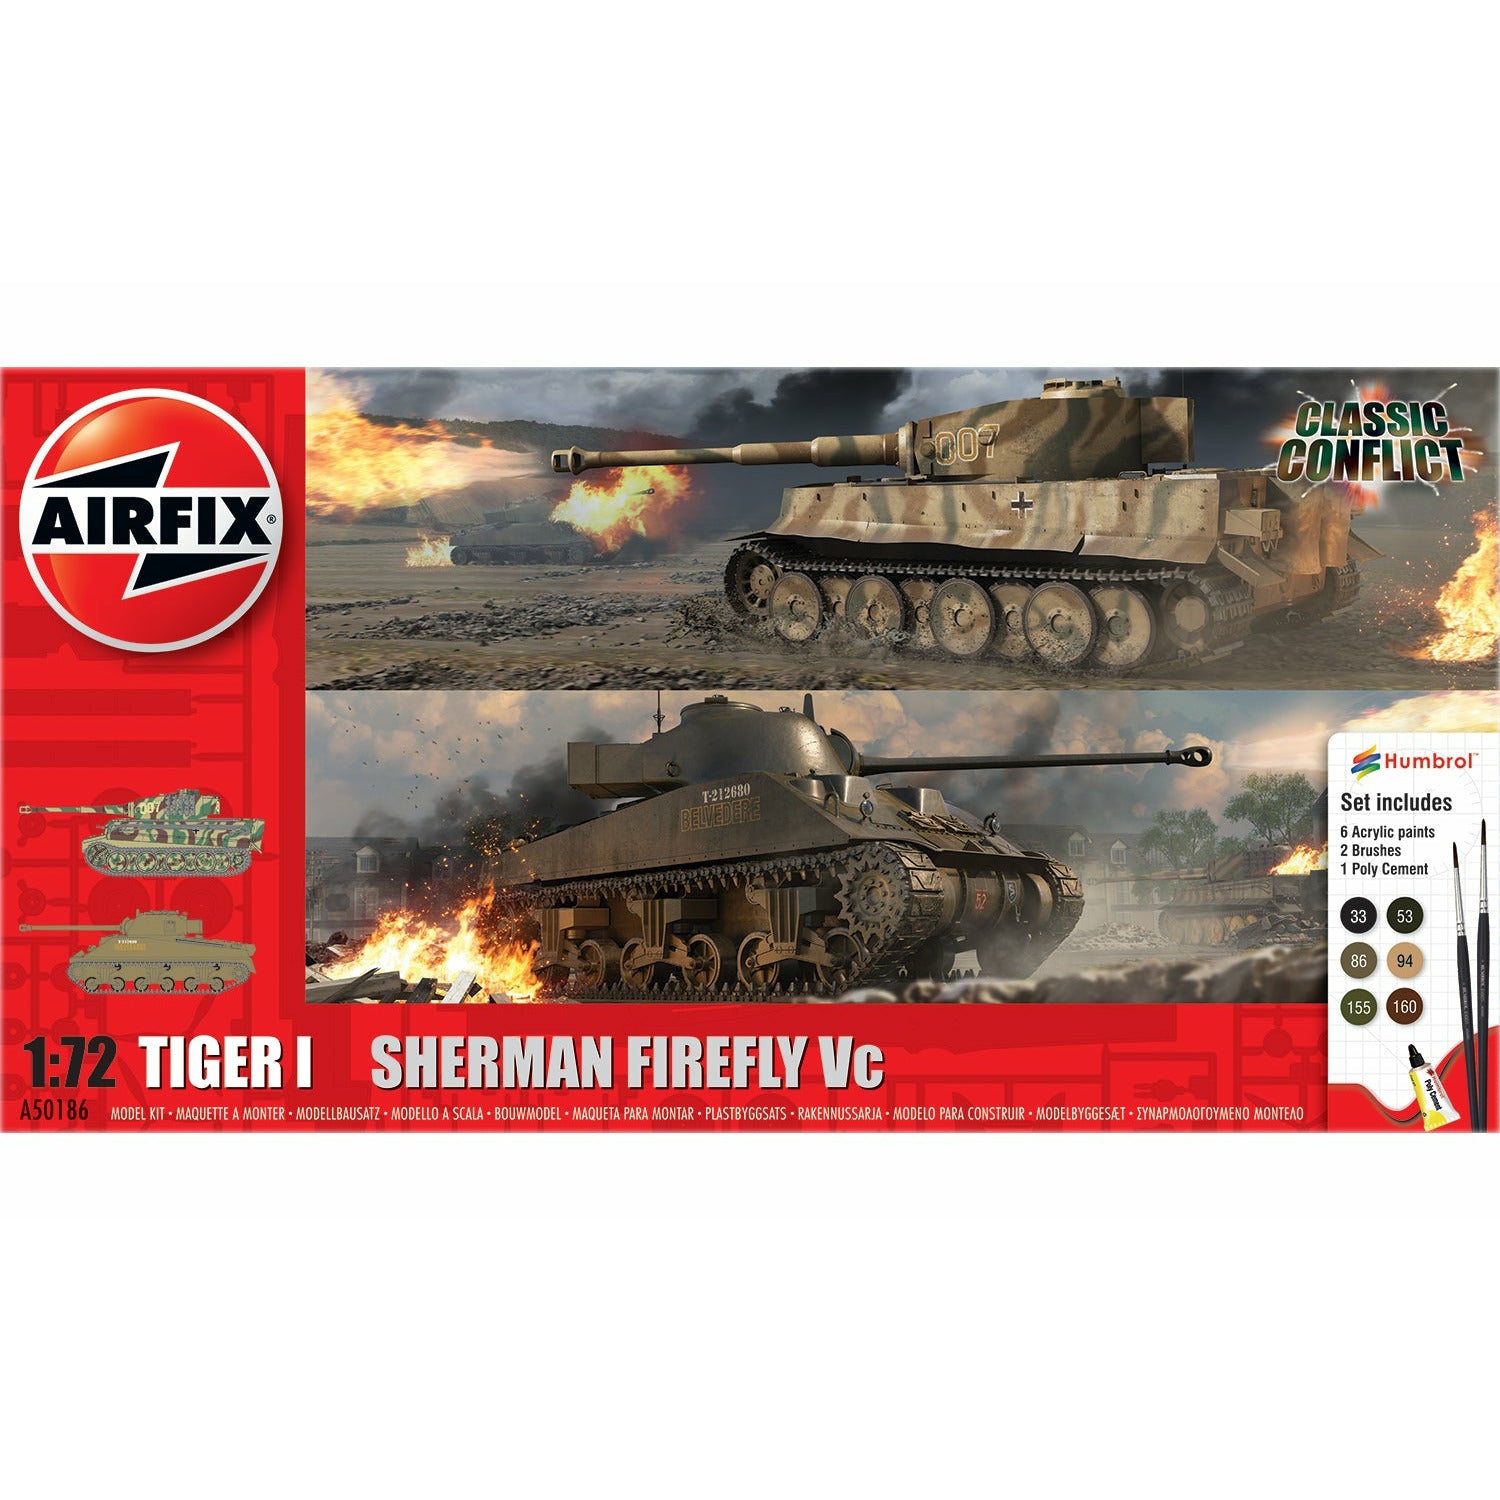 Tiger I vs. Sherman Frifly Classic Conflict 1/72